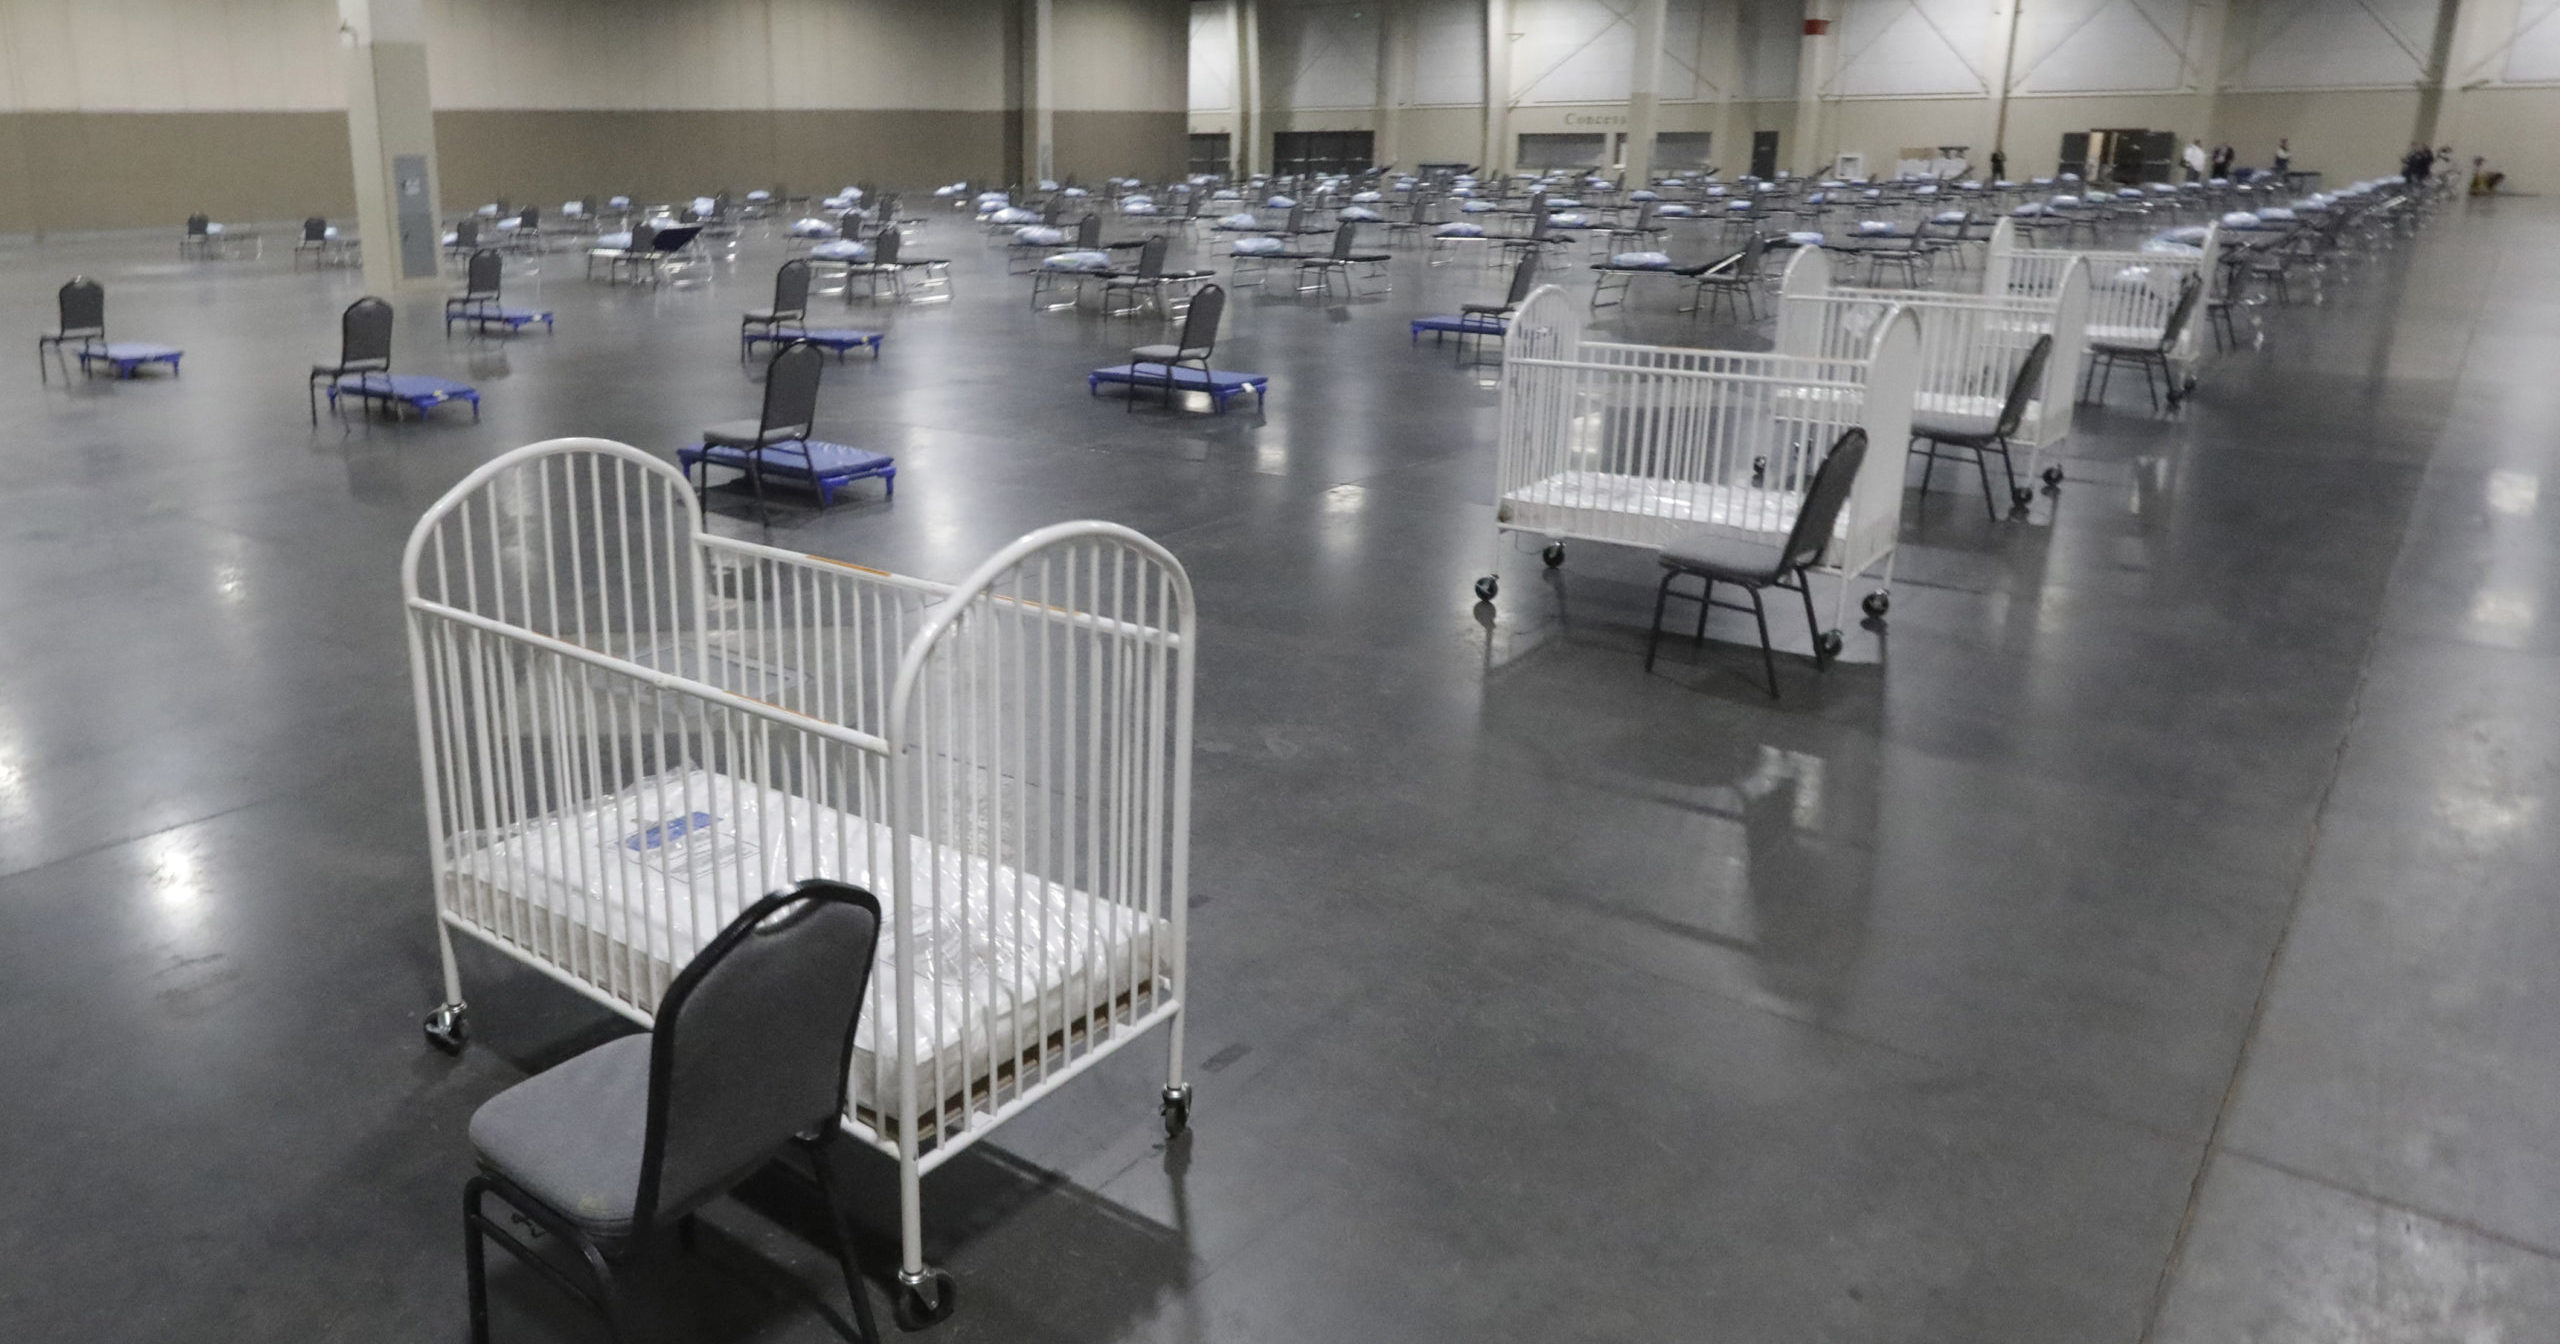 Cots and cribs are arranged at the Mountain America Expo Center in Sandy, Utah, on April 6, 2020, for hospital overflow amid the coronavirus pandemic.